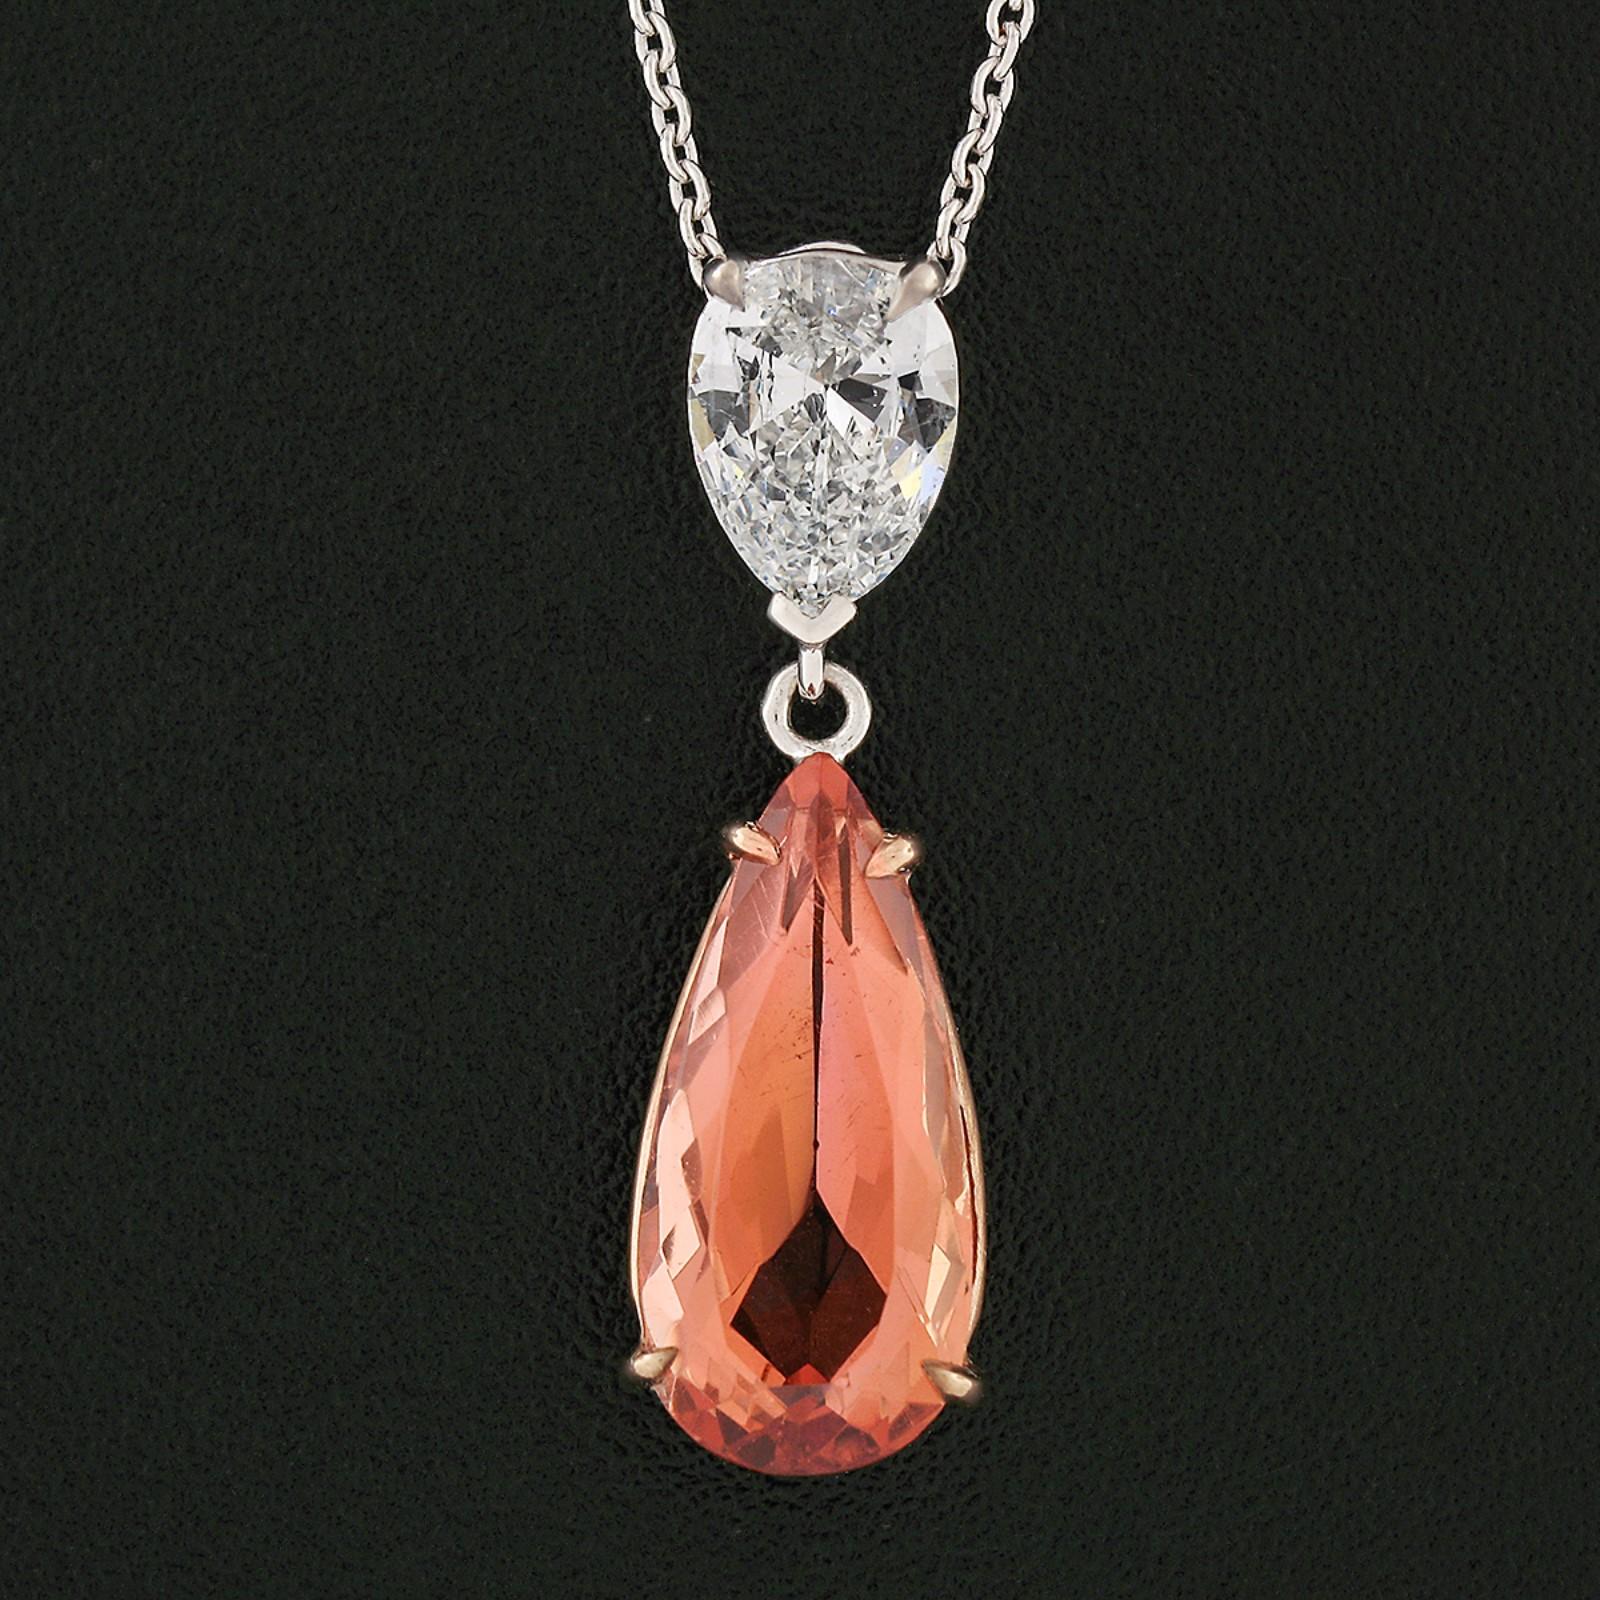 Here we have a very elegant and modern orange topaz and diamond dual teardrop pendant, newly crafted in custom designed solid 14k gold baskets. The pendant features a stunning, 2.58 carats, GIA certified natural topaz stone displaying glowing and